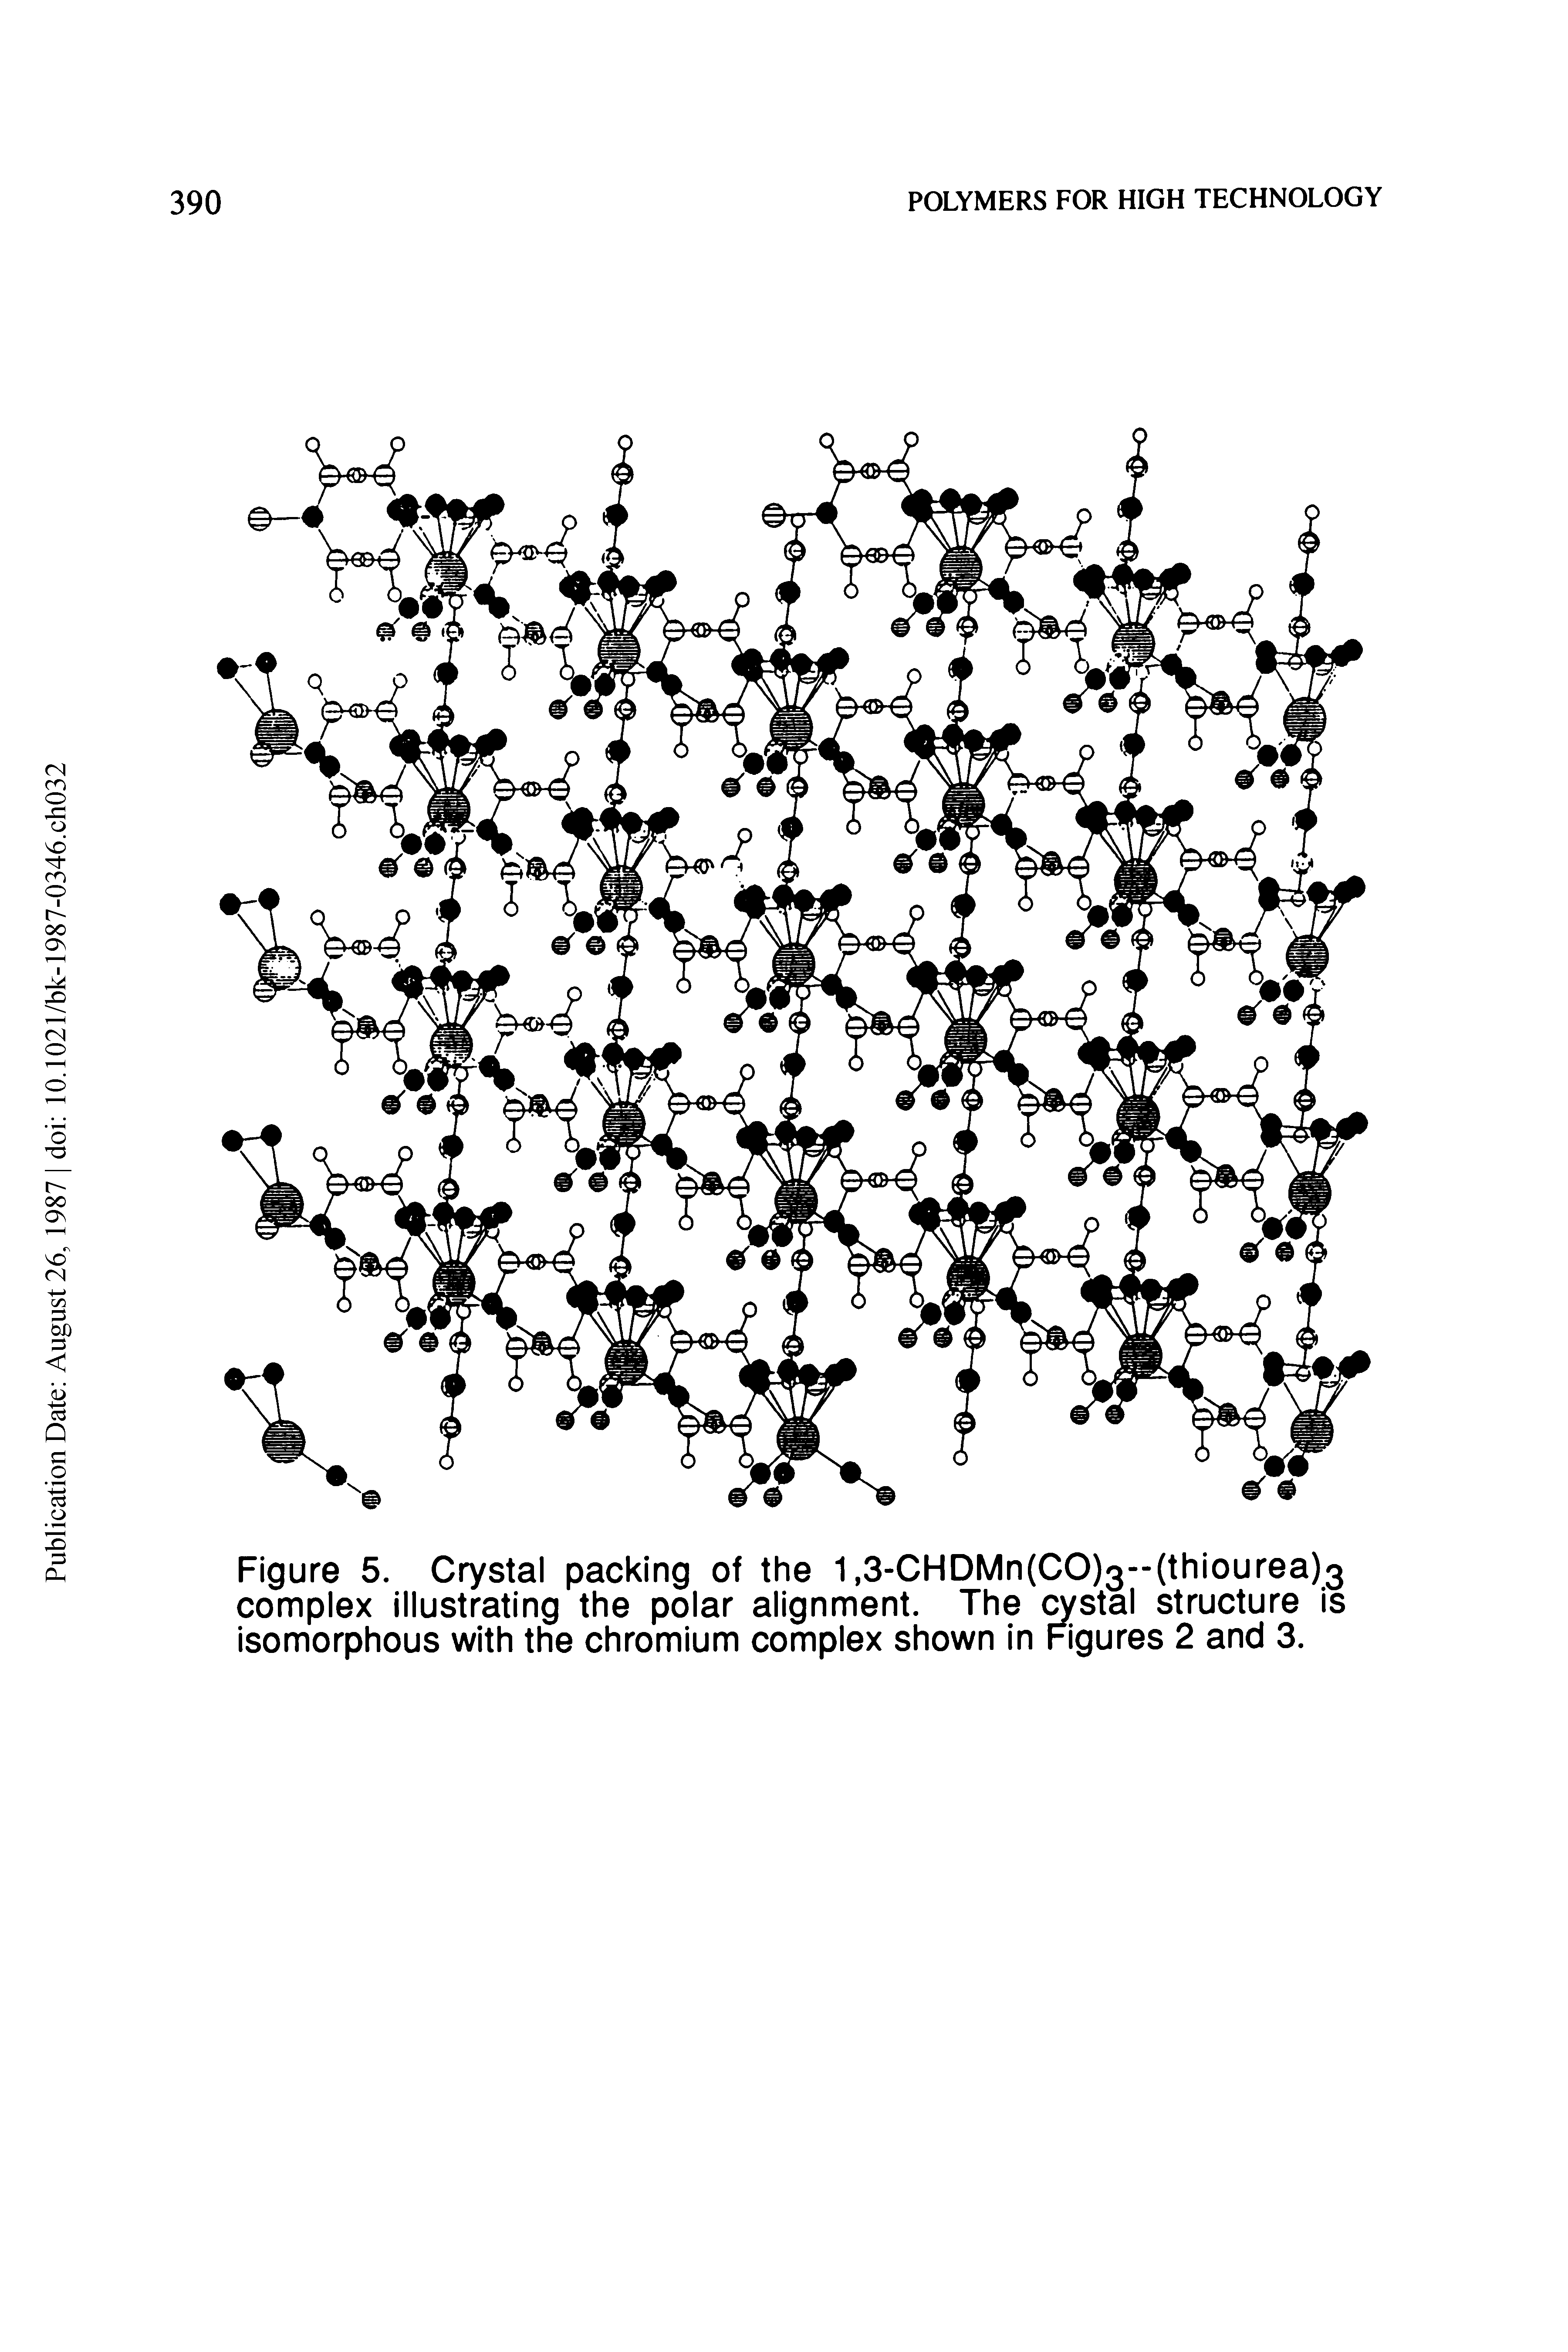 Figure 5. Crystal packing of the 1,3-CHDMn(CO)3--(thiourea)3 complex illustrating the polar alignment. The qrstal structure is isomorphous with the chromium complex shown in Figures 2 and 3.